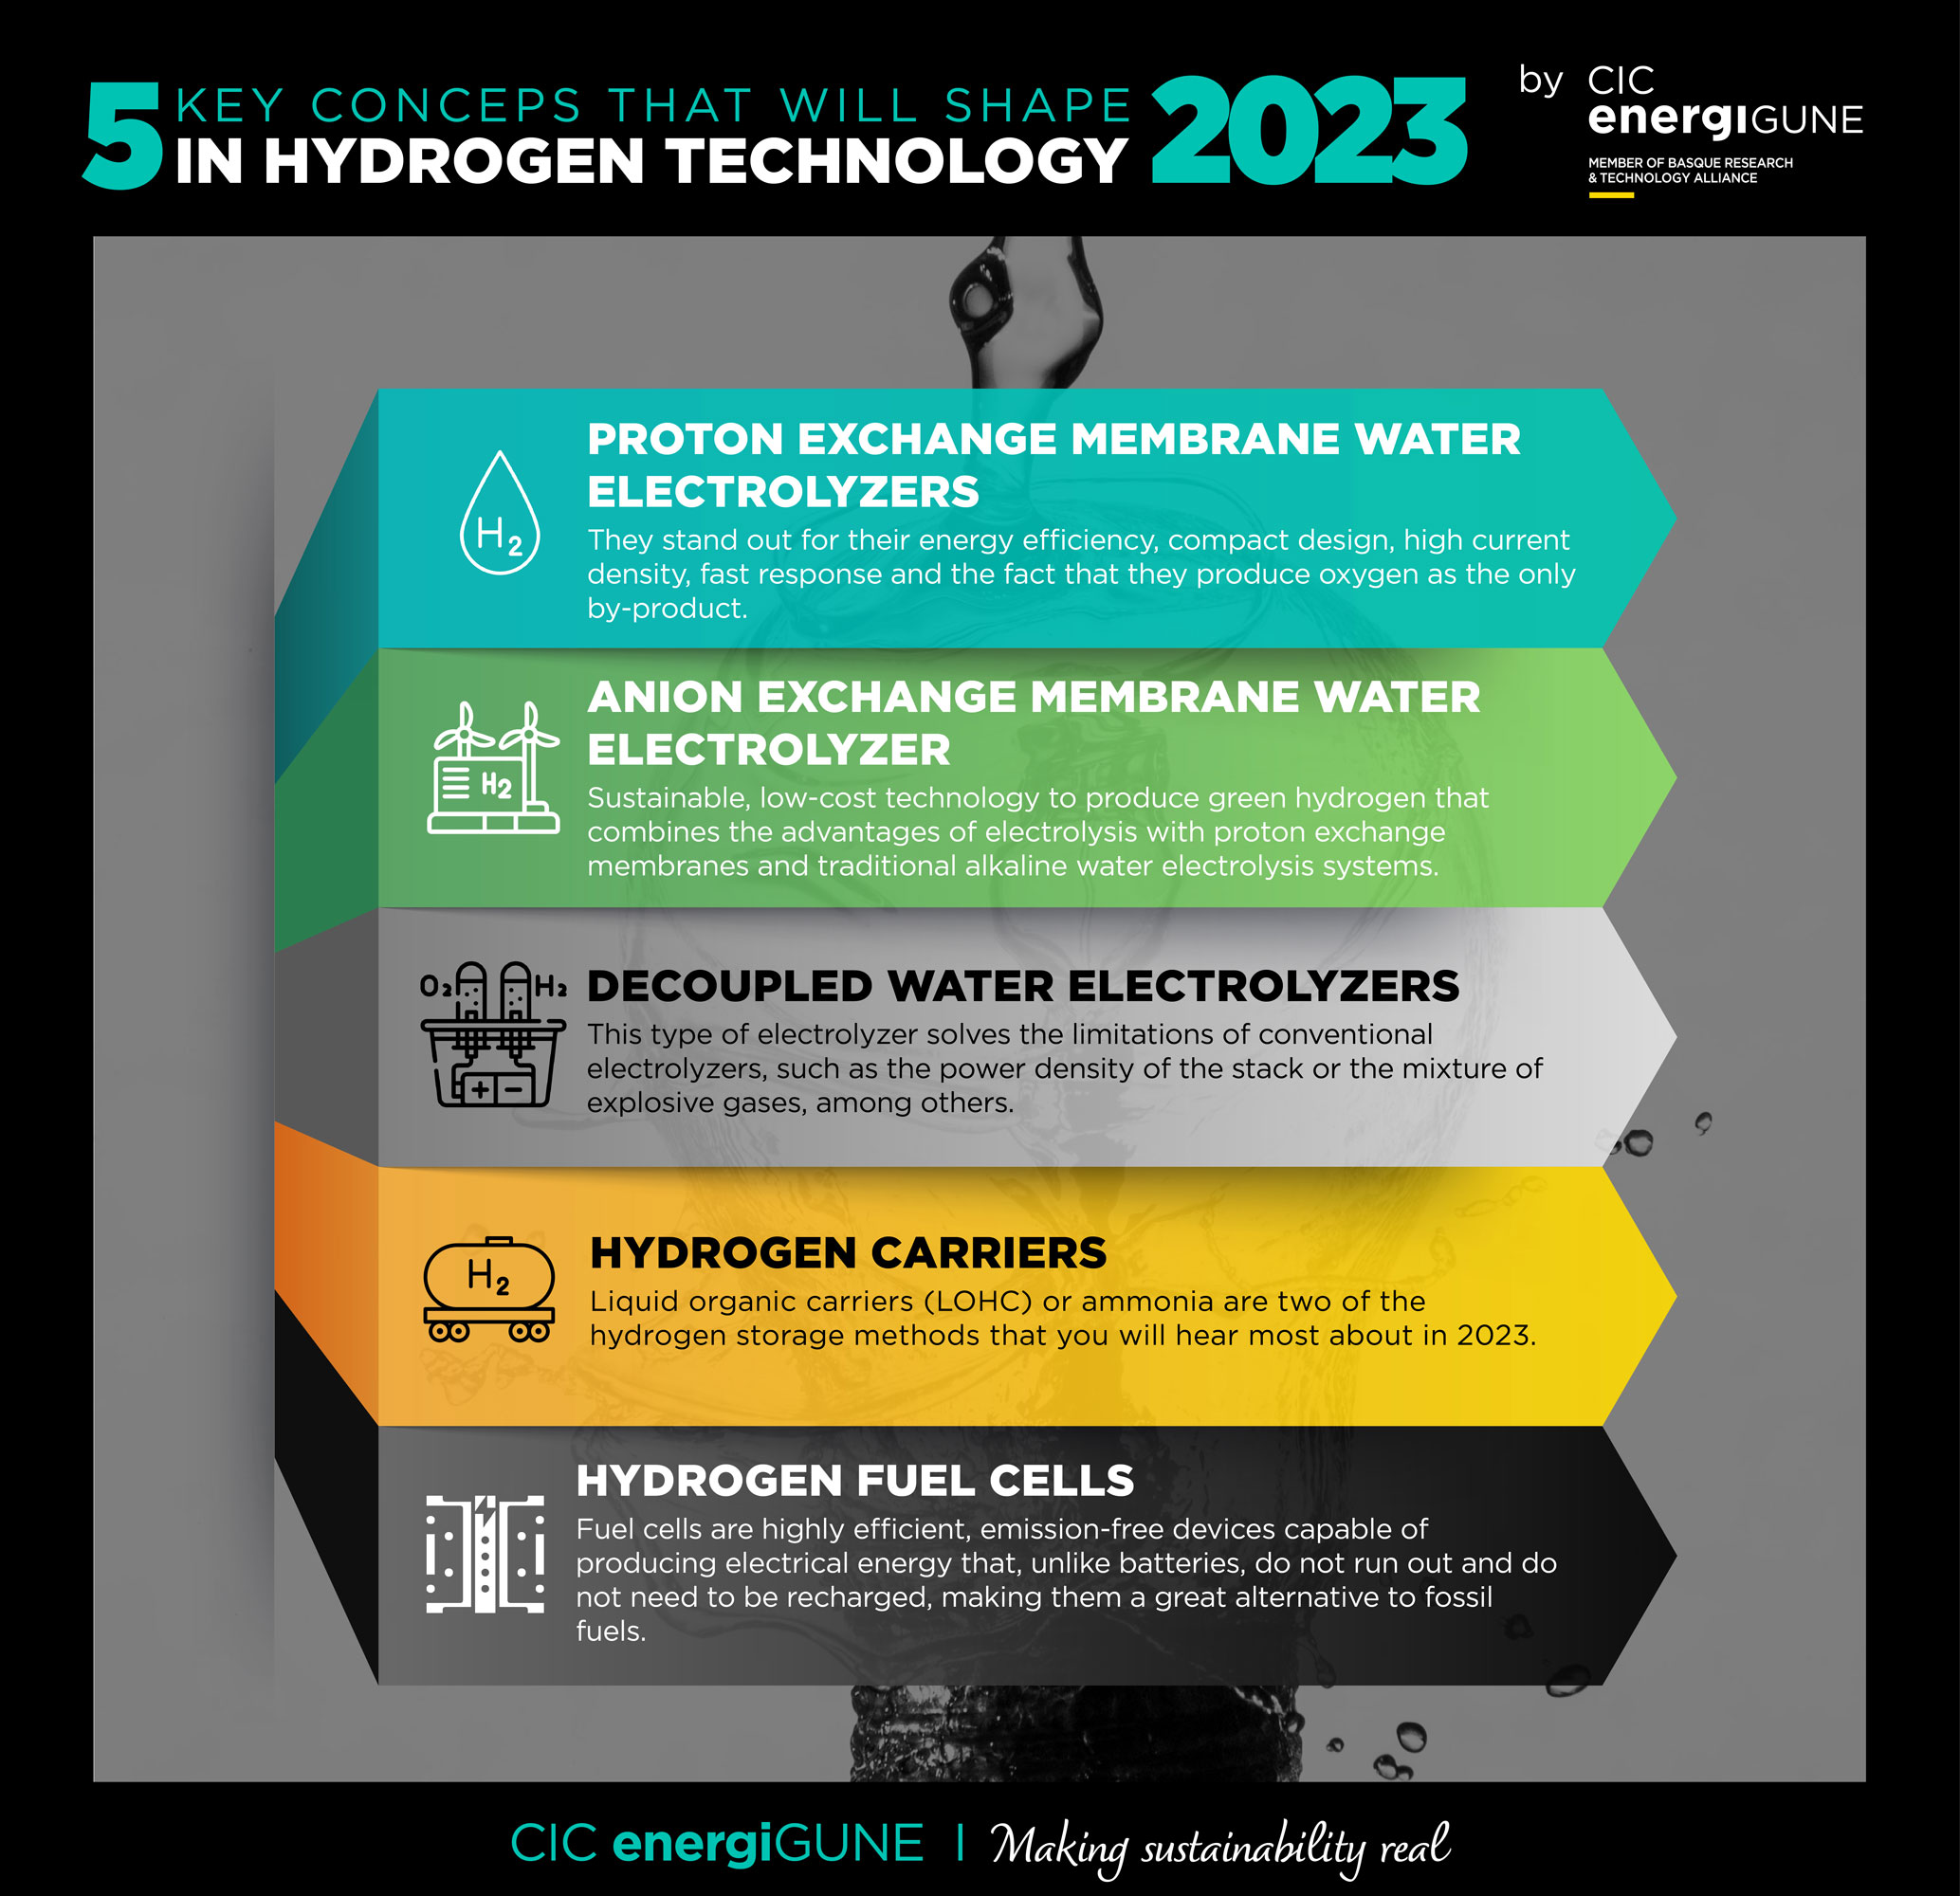 FUEL CELLS, DECOUPLED ELECTROLYZERS... THE KEY HYDROGEN CONCEPTS THAT WILL SHAPE 2023